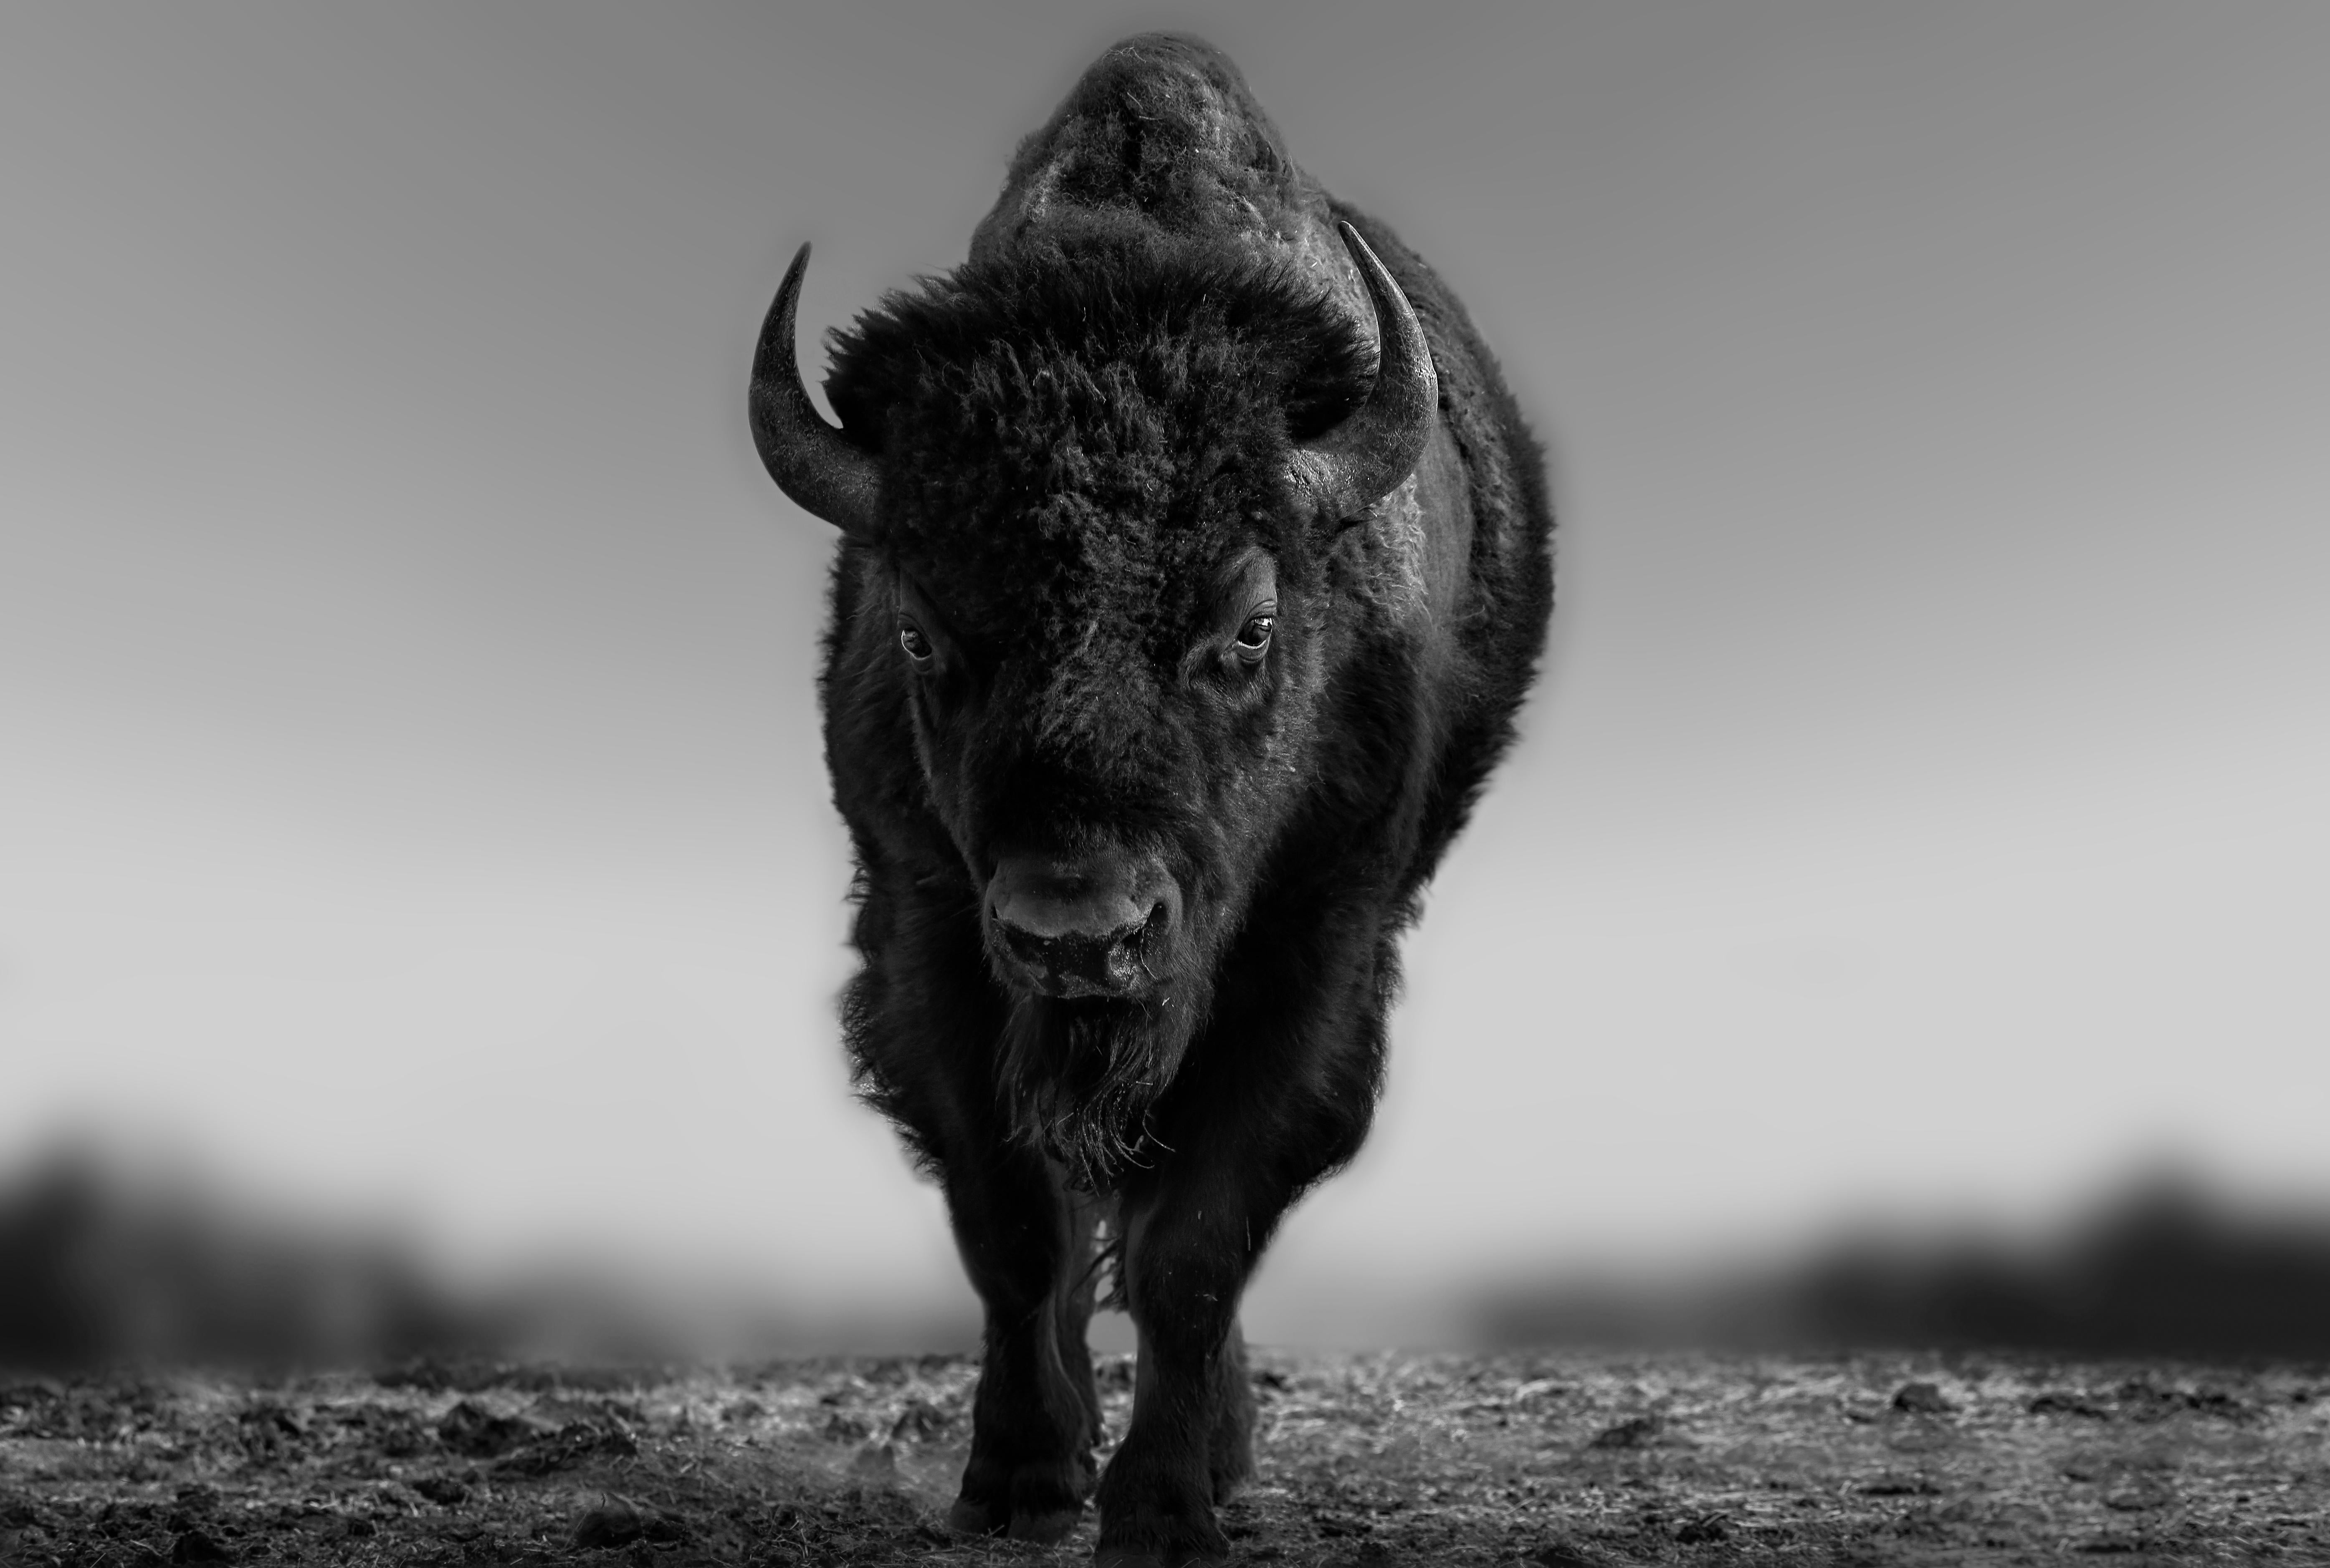 This is a contemporary photograph of an American Bison.  
Unsinged print
Printed on archival paper and using archival inks
Framing available. Inquire for rates.   

 Shane Russeck has built a reputation for capturing America's landscapes, cultures